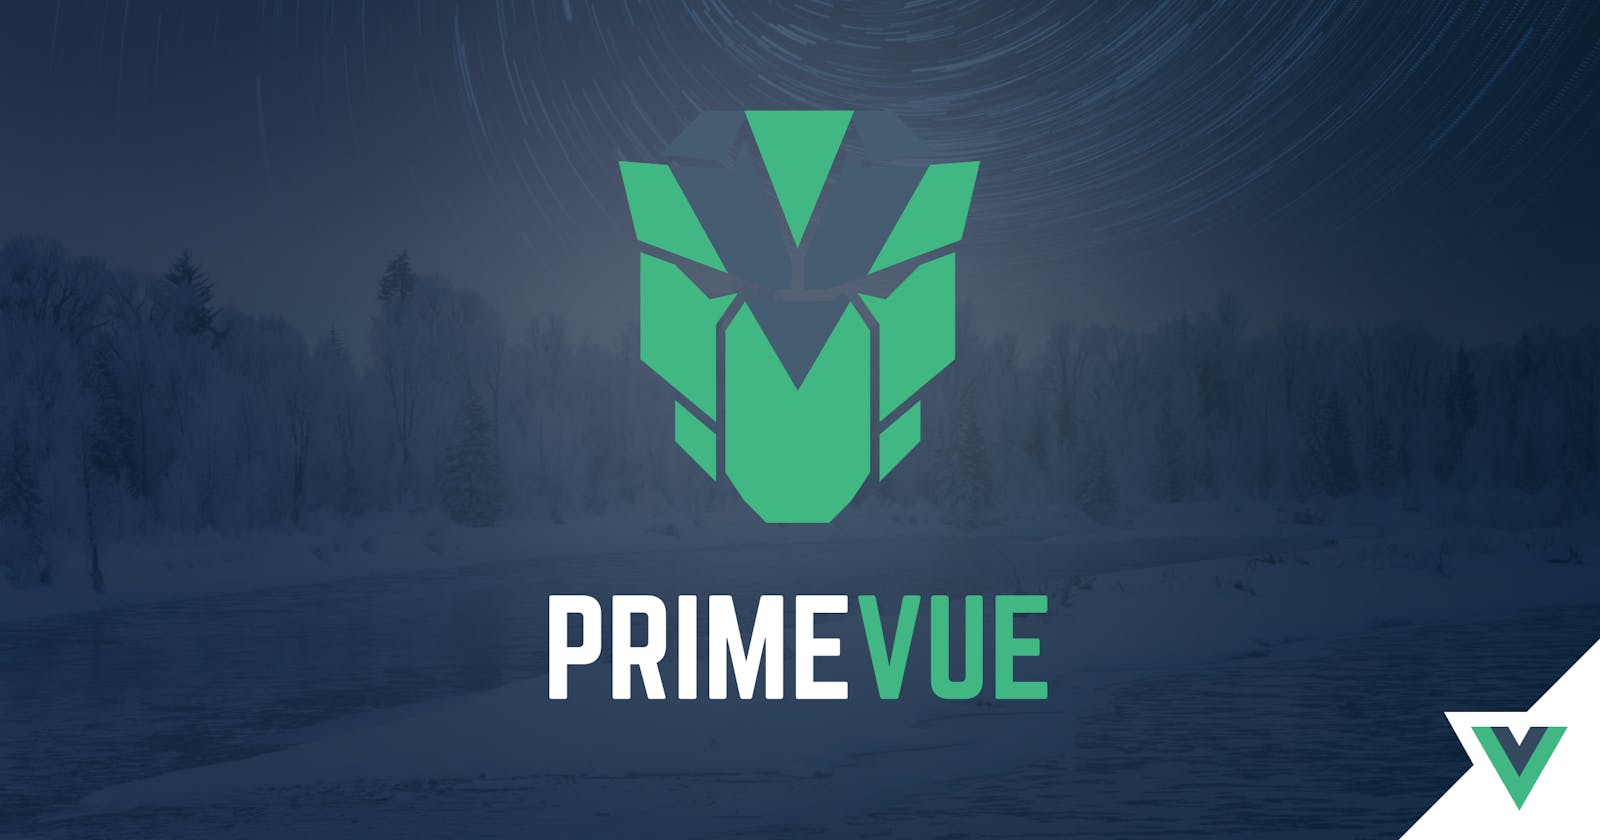 PrimeVue 3.3.0 brings Table Filtering, Scrolling, Enhanced Selects and Colors to Vue 3